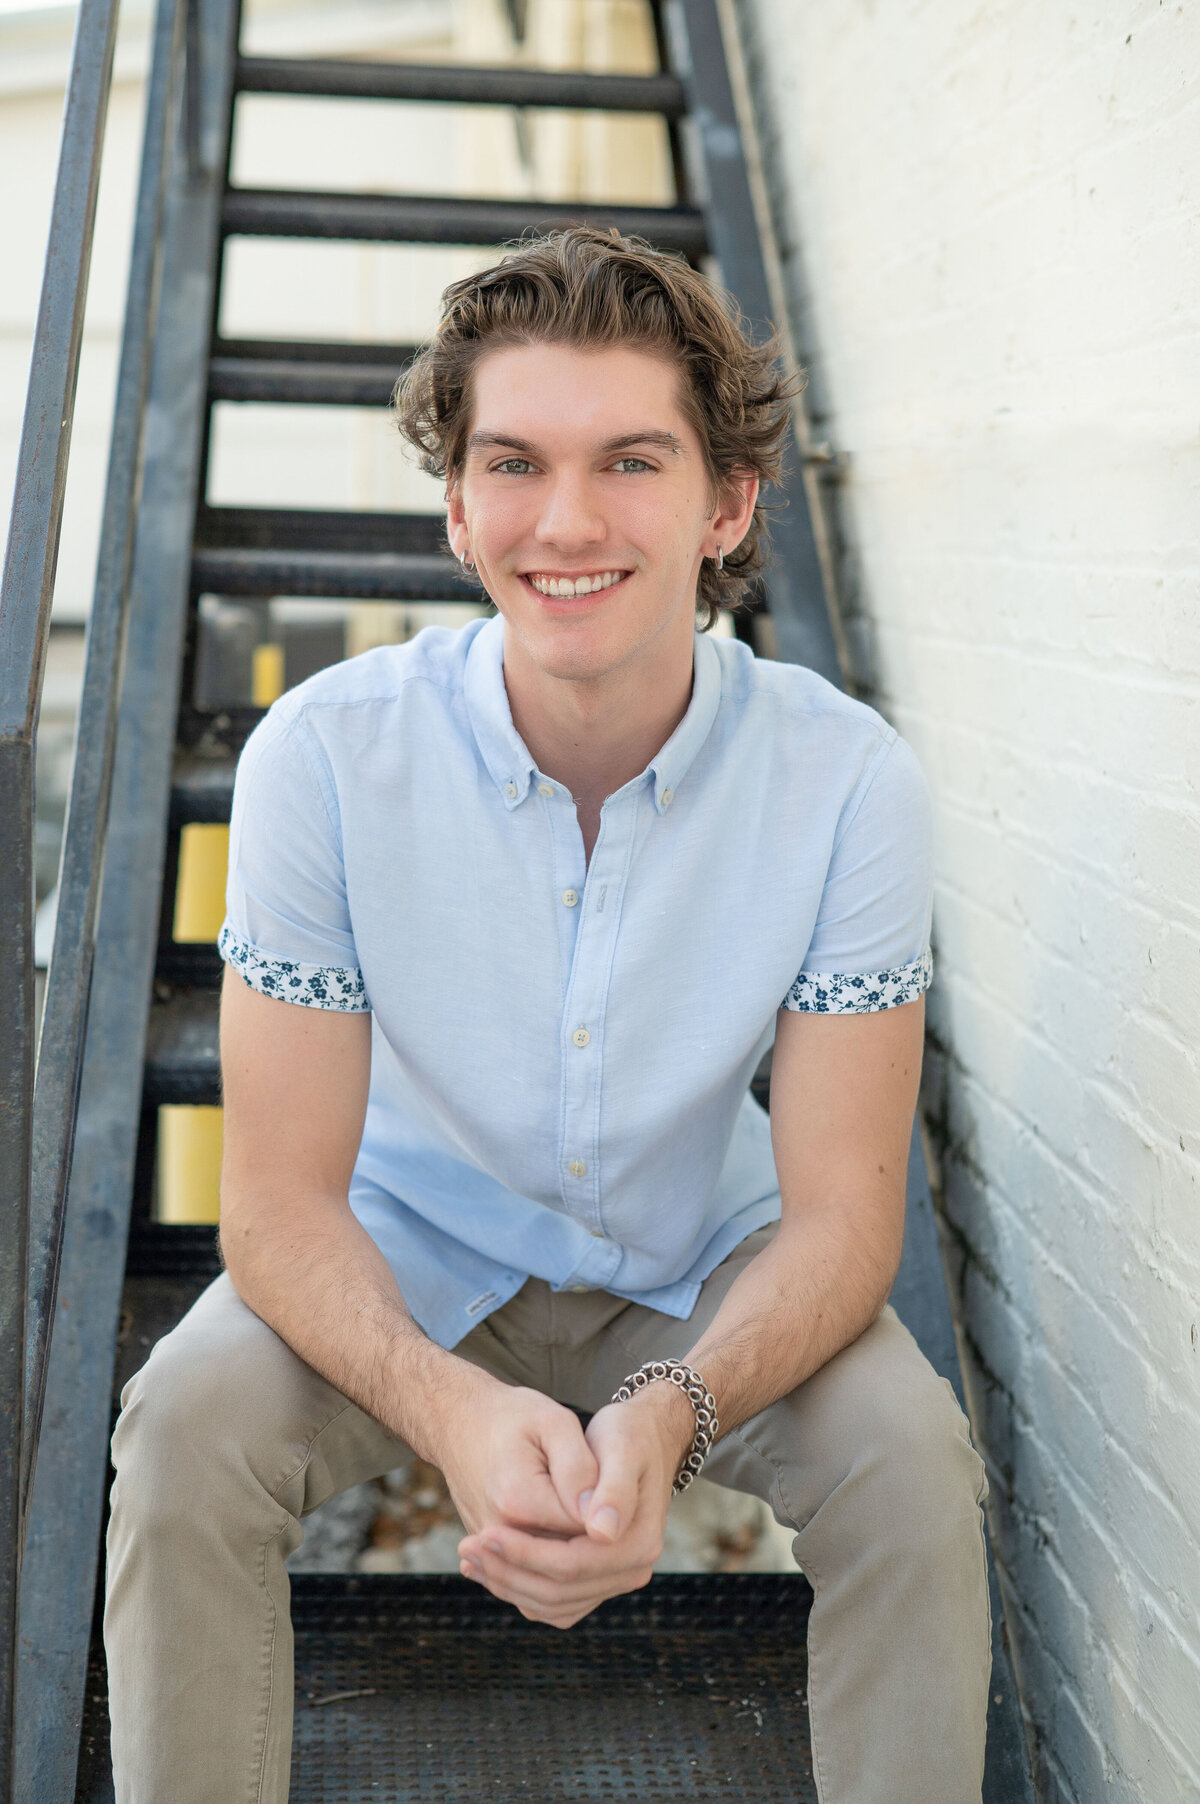 High school senior boy sitting on industrial stairs smiles at camera.